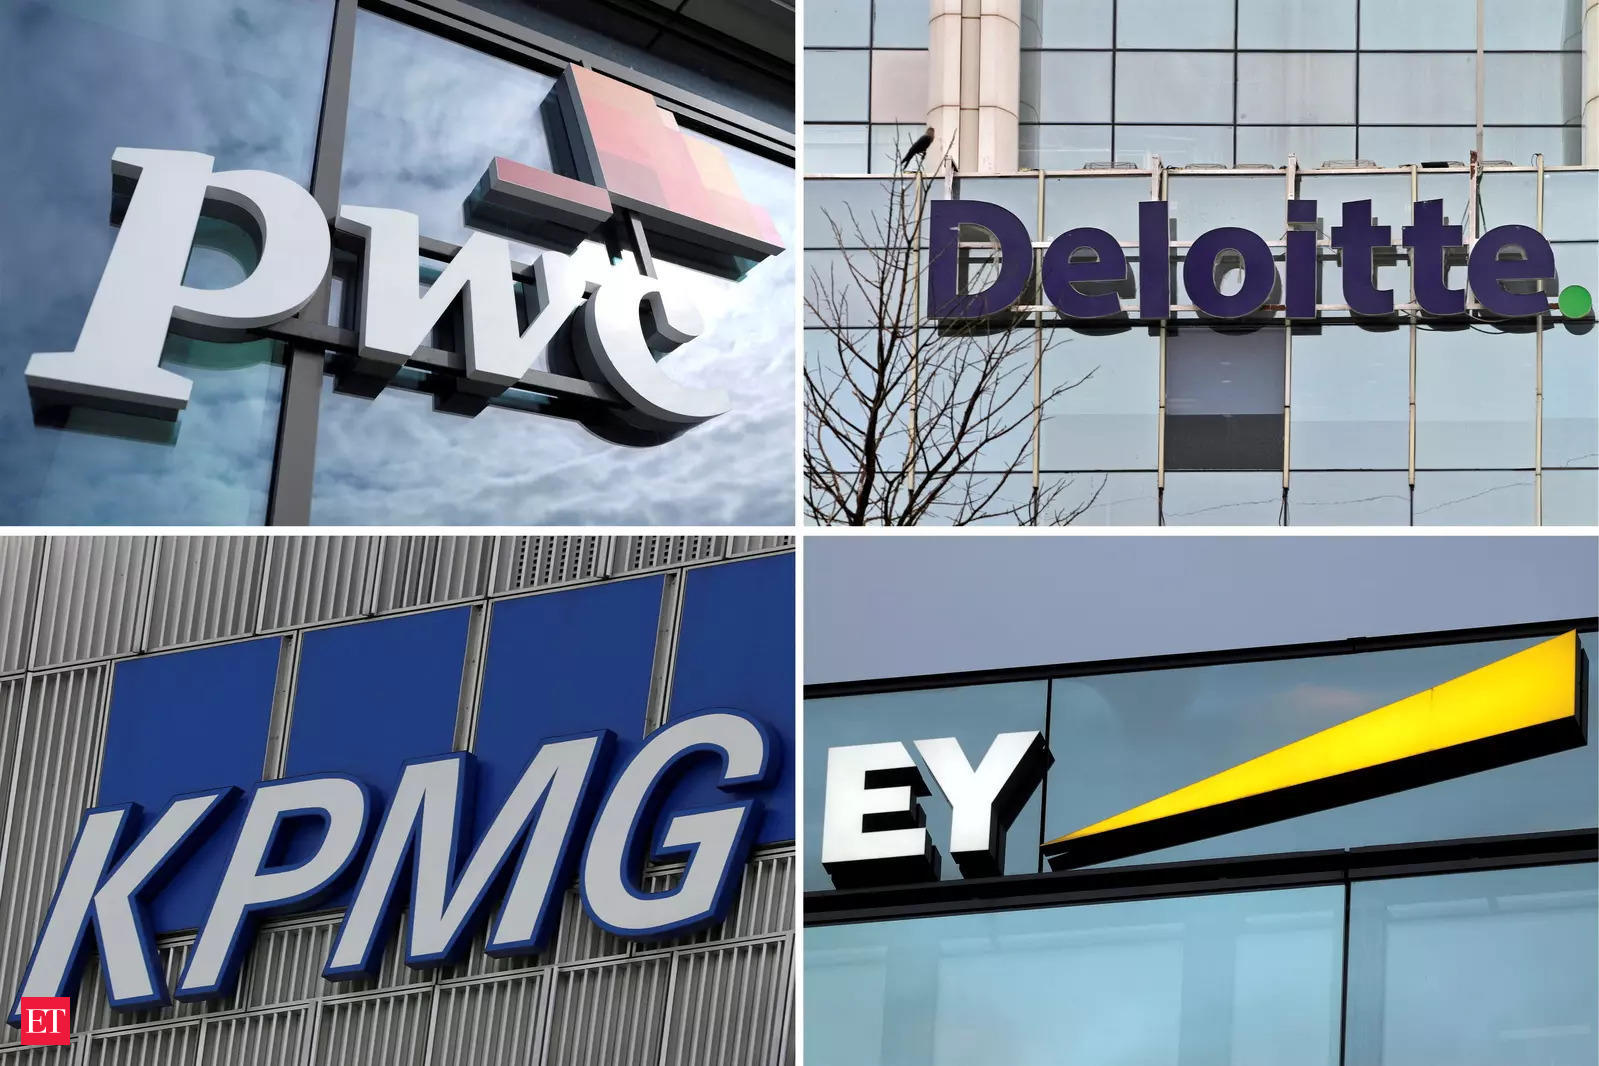 conduent learning services ey pwc deloitte